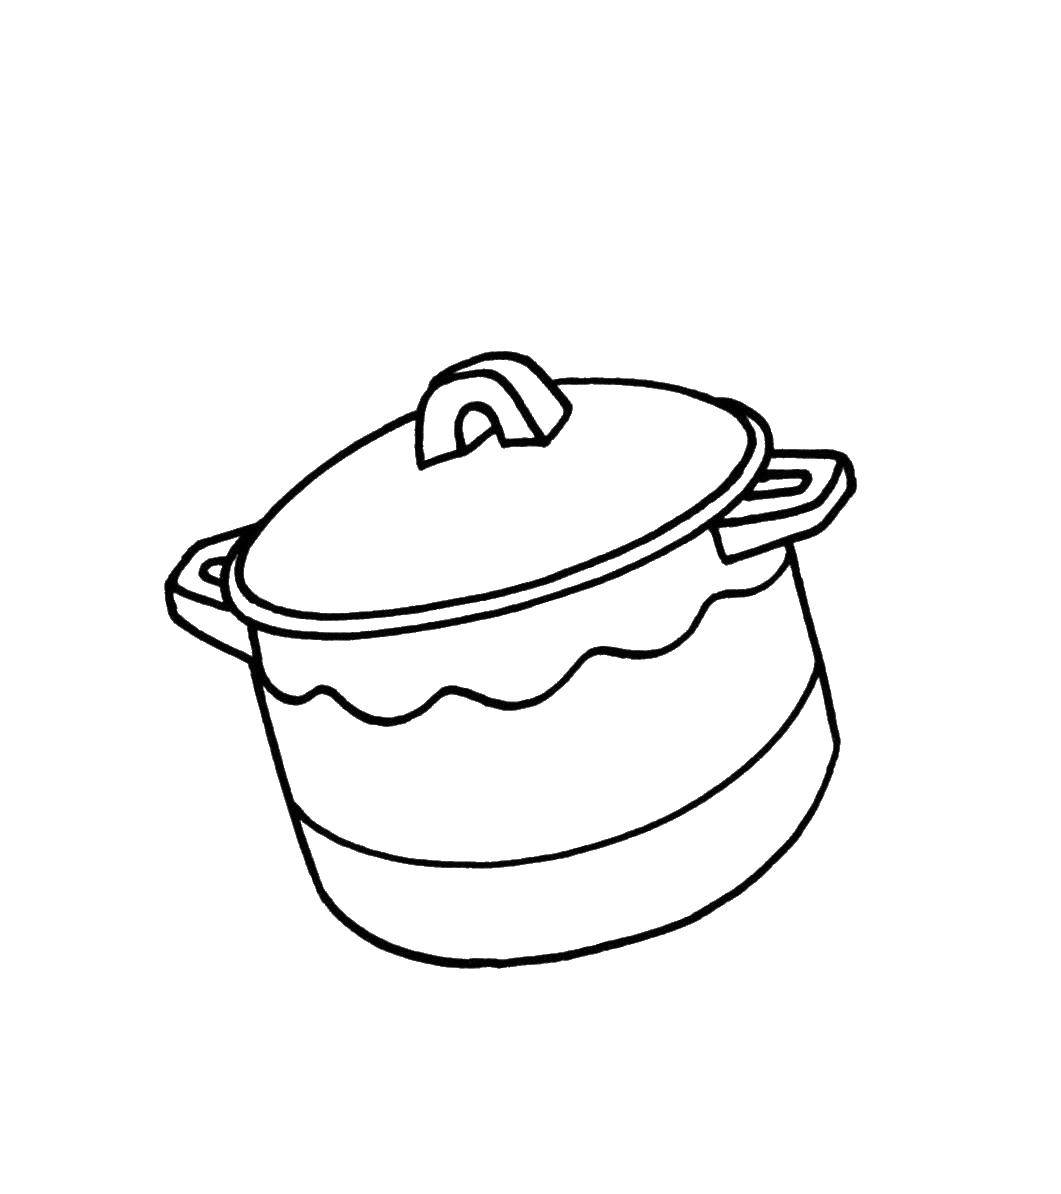 Coloring The pot. Category dishes. Tags:  dishes, pot.